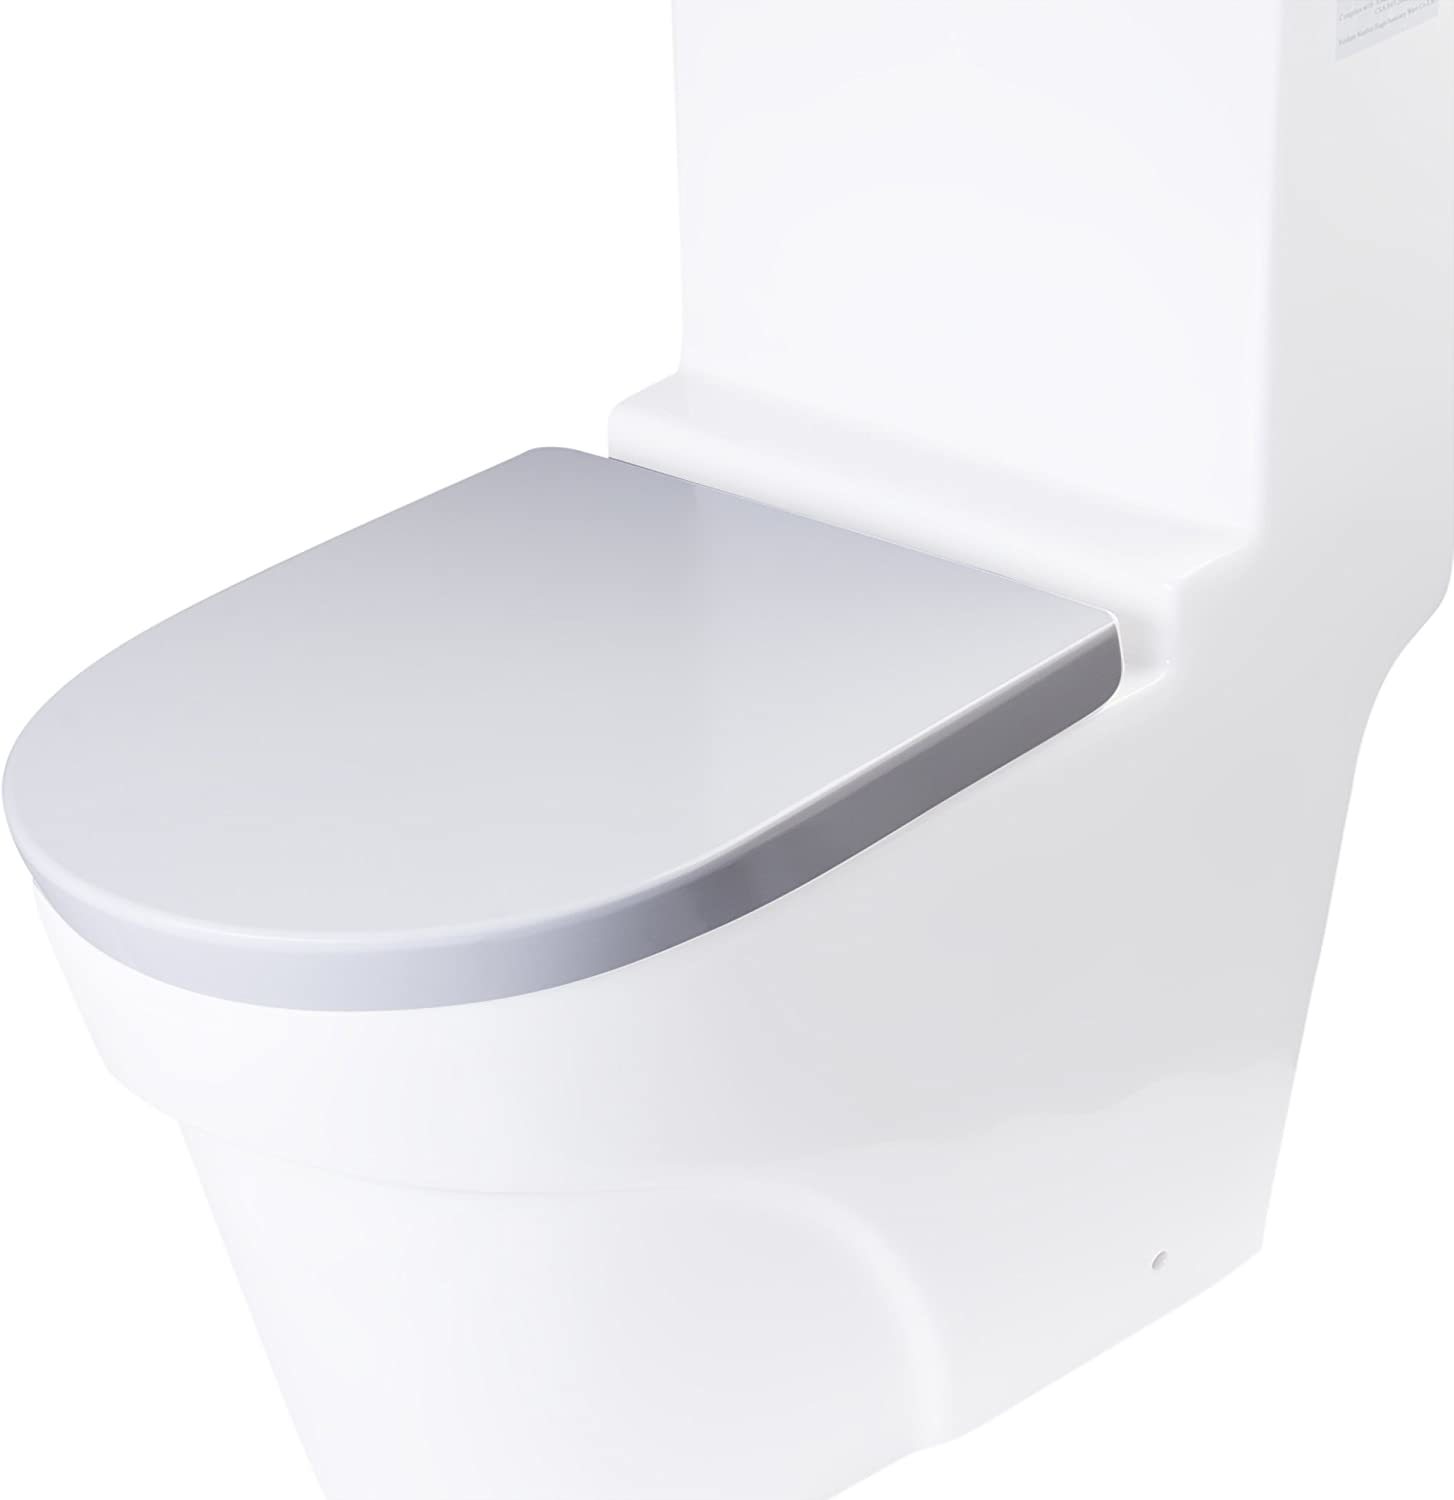 Eago R-326Seat Replacement Soft Closing Toilet Seat For Tb326 - $201.99